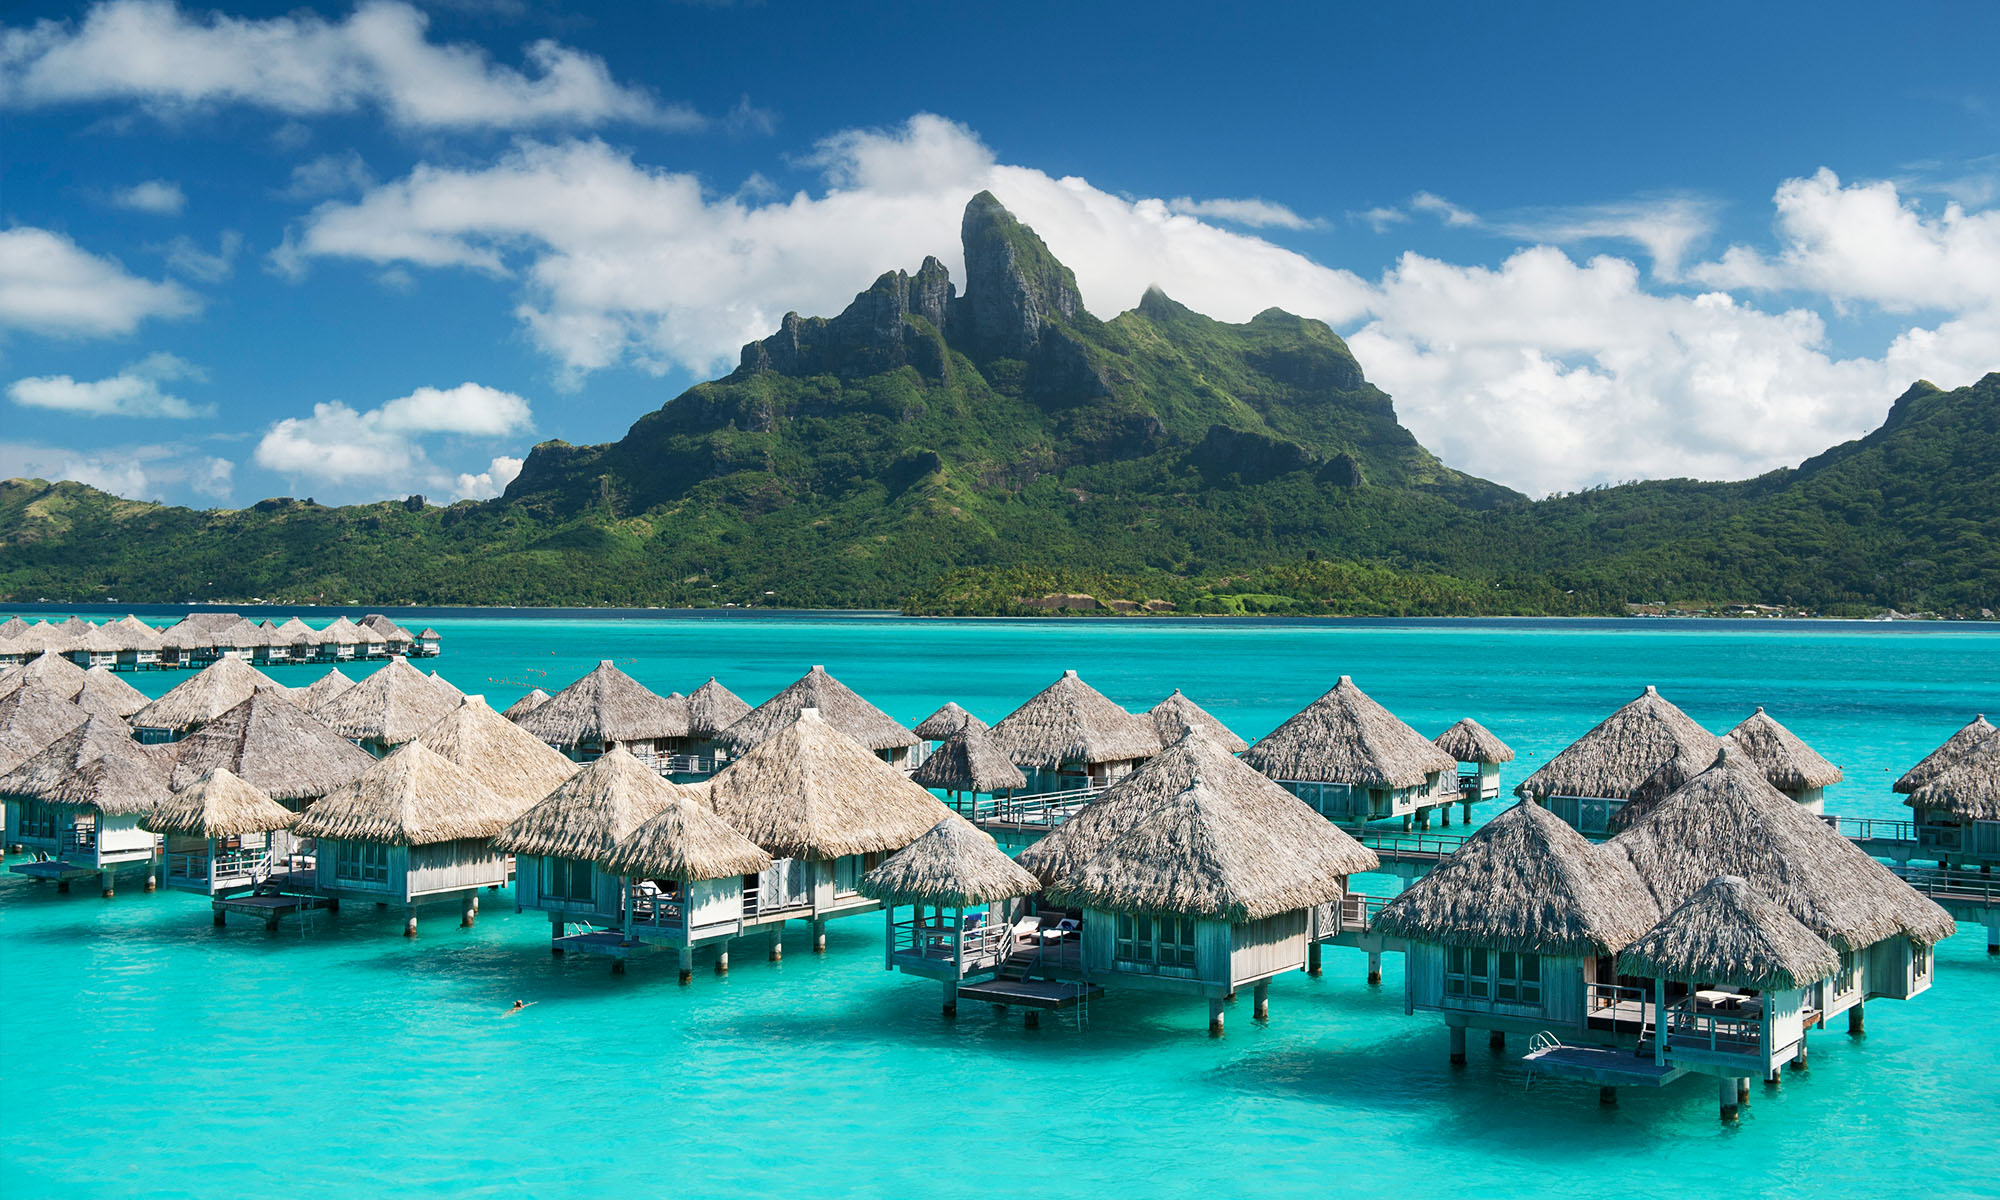 San Francisco to Tahiti French Polynesia $500 RT Nonstop Airfares on Air Caraibes or French Bee (Limited Travel January - February 2023)